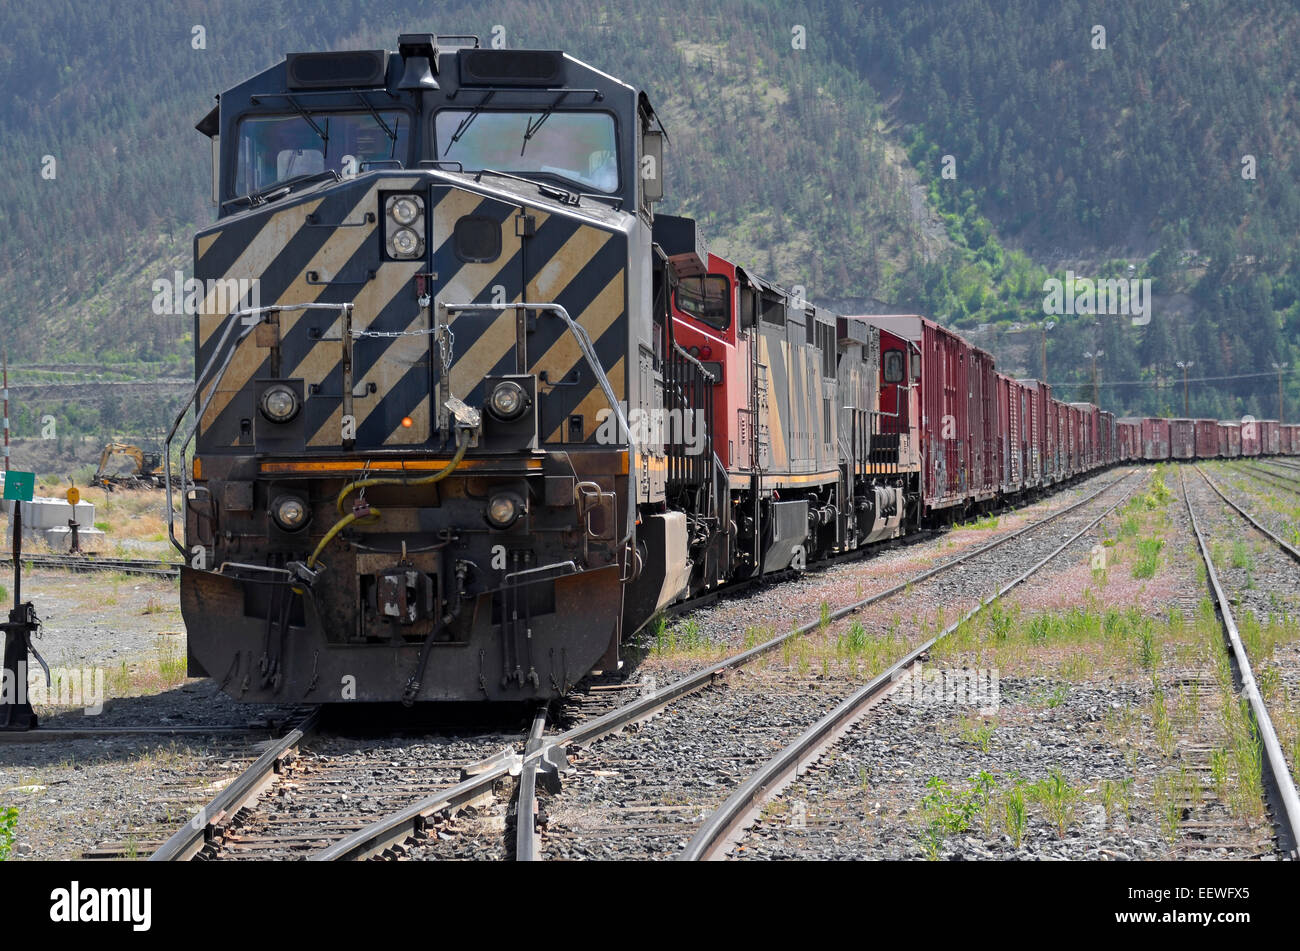 Long freight train with several diesel engines standing on railroad track Stock Photo